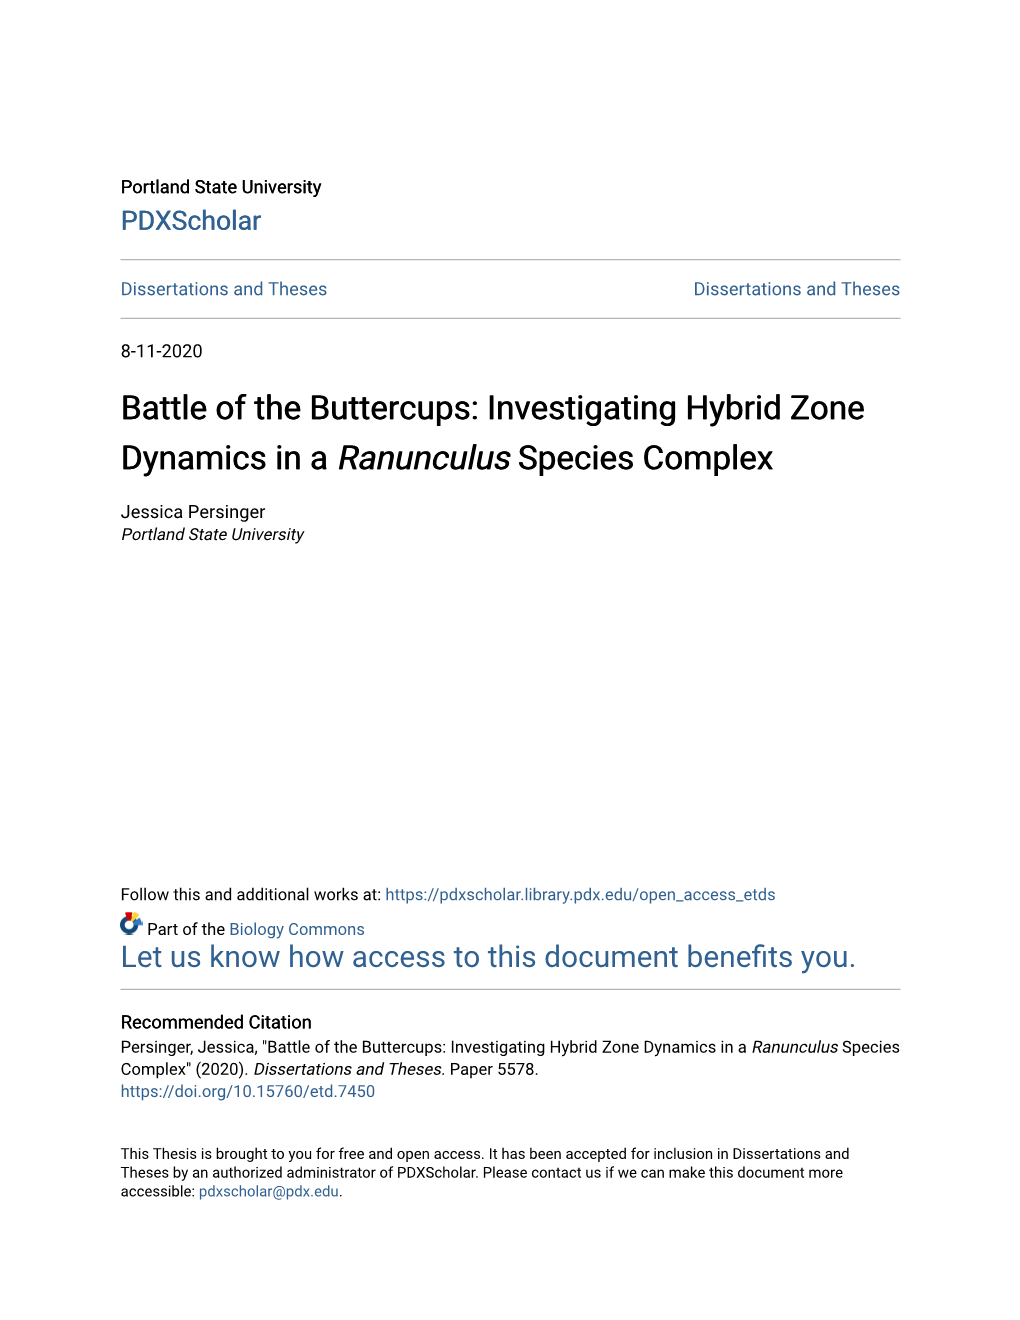 Battle of the Buttercups: Investigating Hybrid Zone Dynamics in a Ranunculus Species Complex